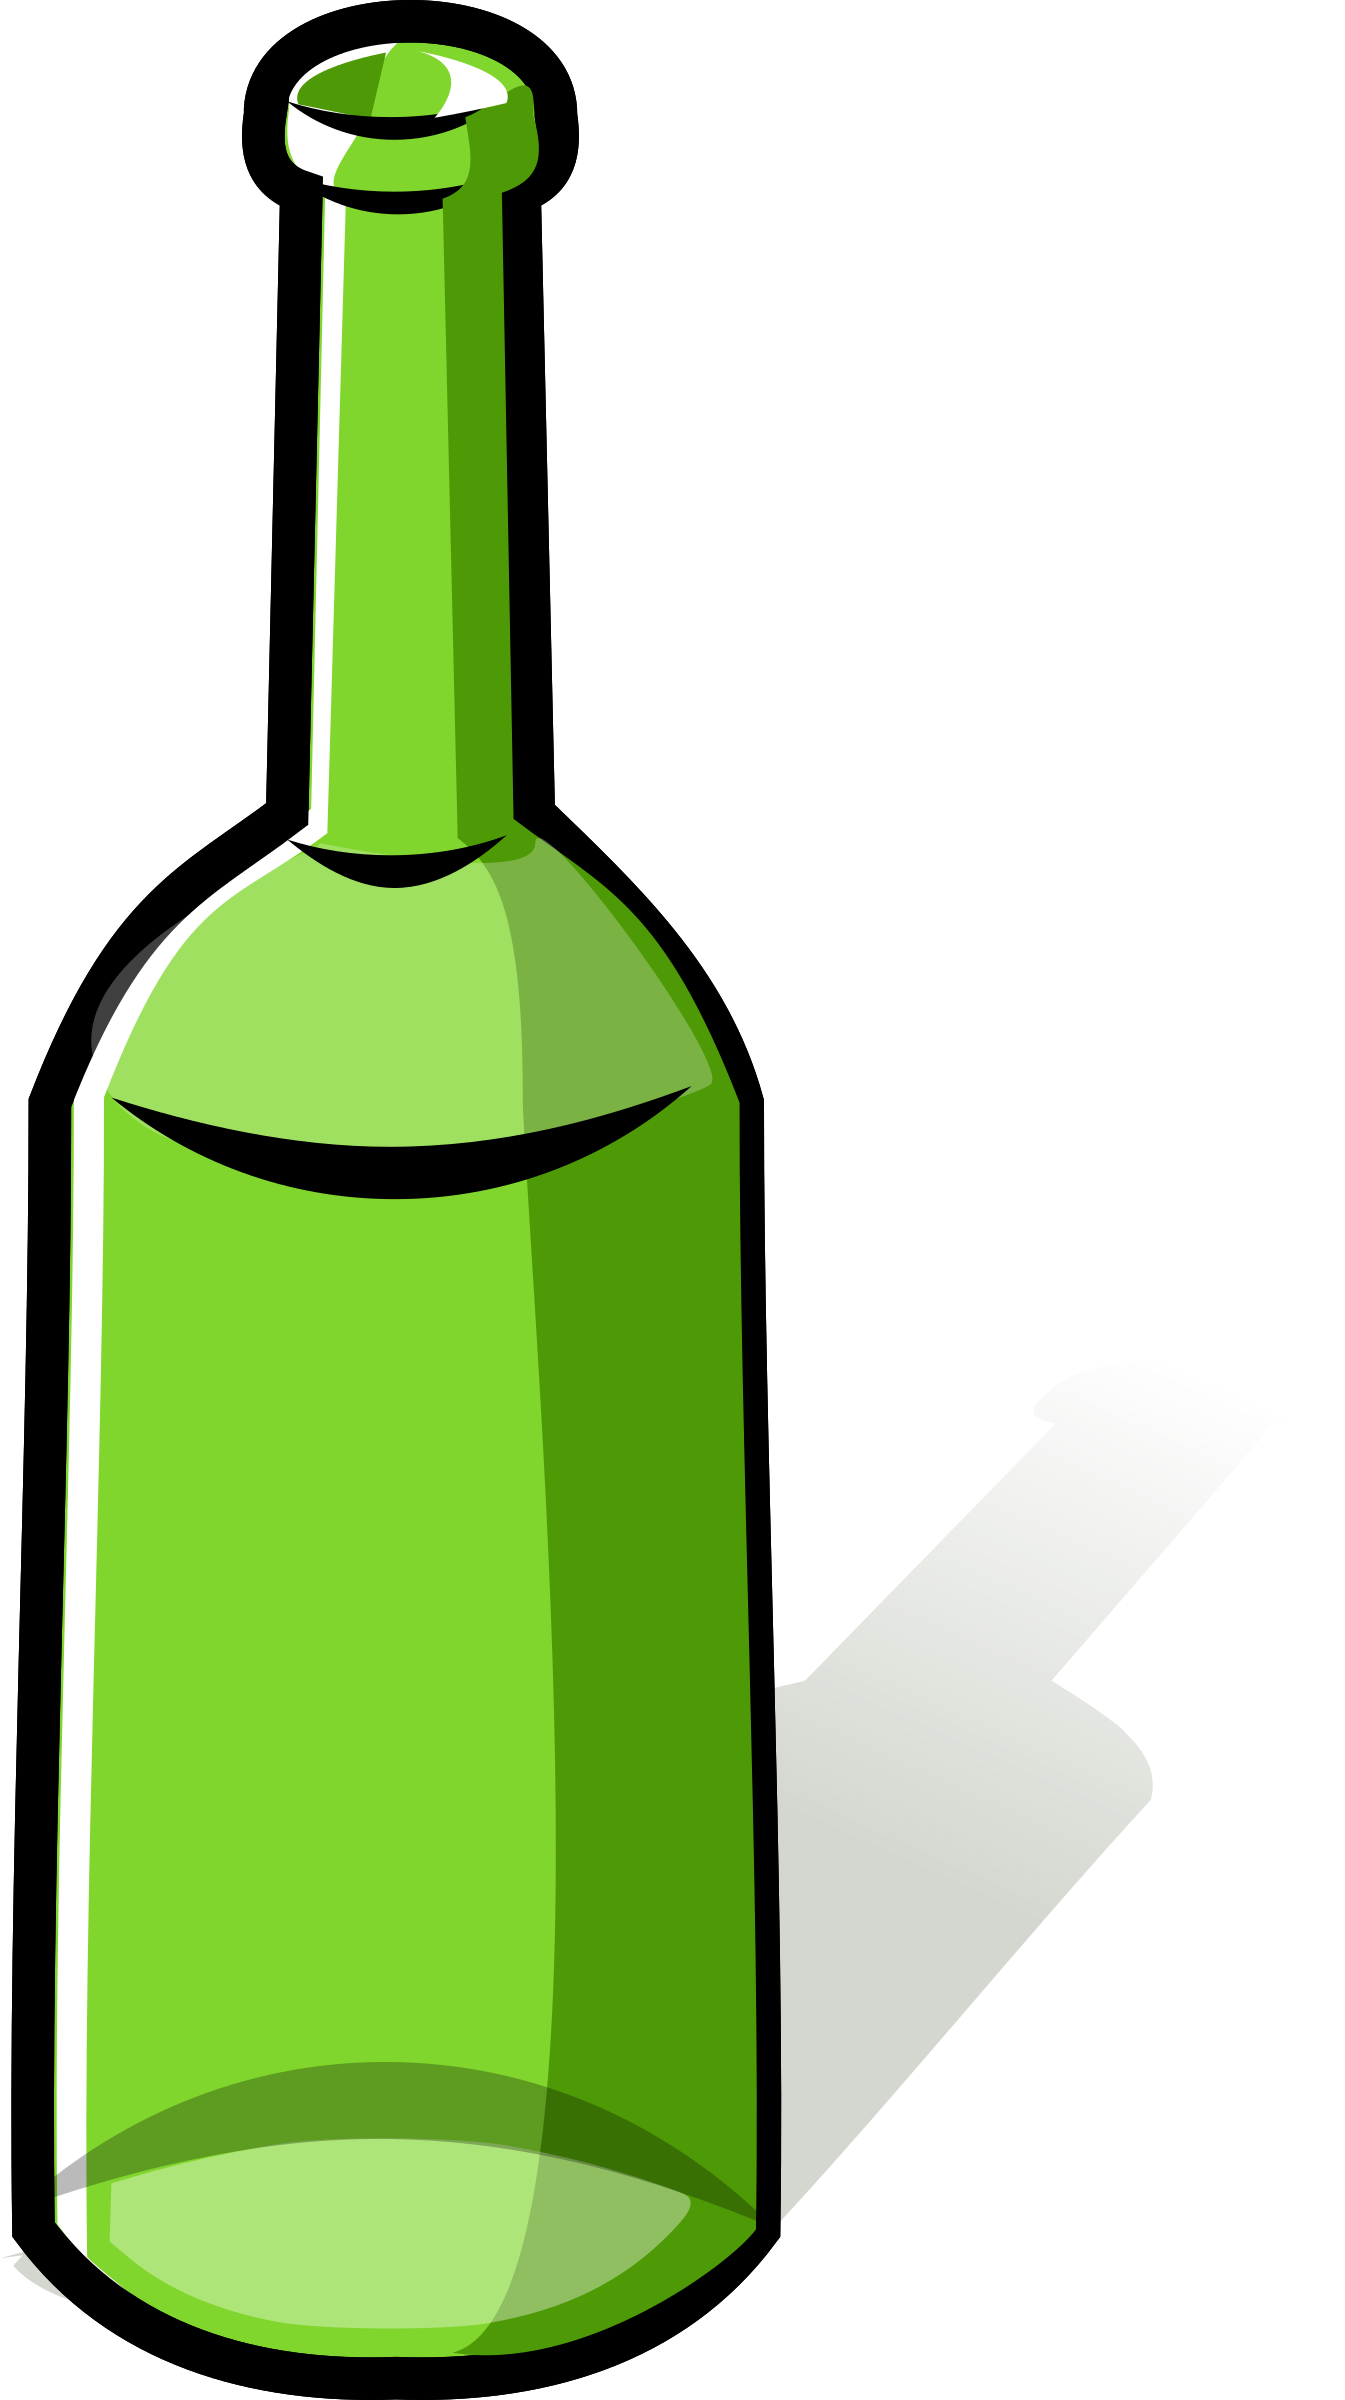 animated bottle clipart 10 free Cliparts | Download images ...